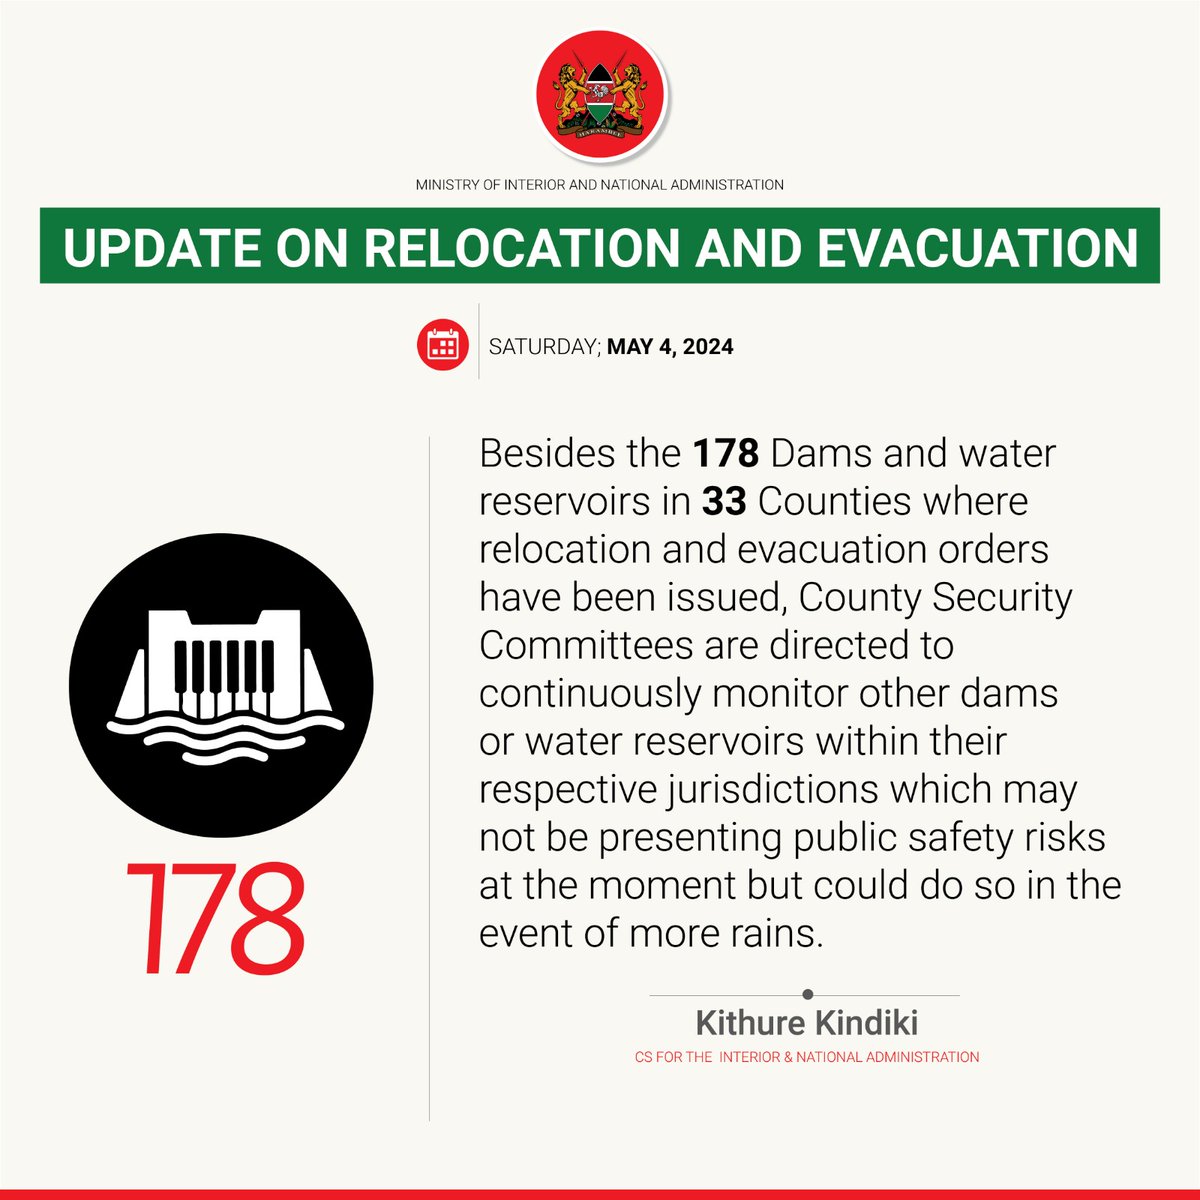 Upholding dignity and respect, Interior Cabinet Secretary Kithure Kindiki instructs security agencies to conduct relocations and evacuations in an orderly and humane manner, prioritizing the well-being of affected individuals.

#MitigatingFloodsEffects